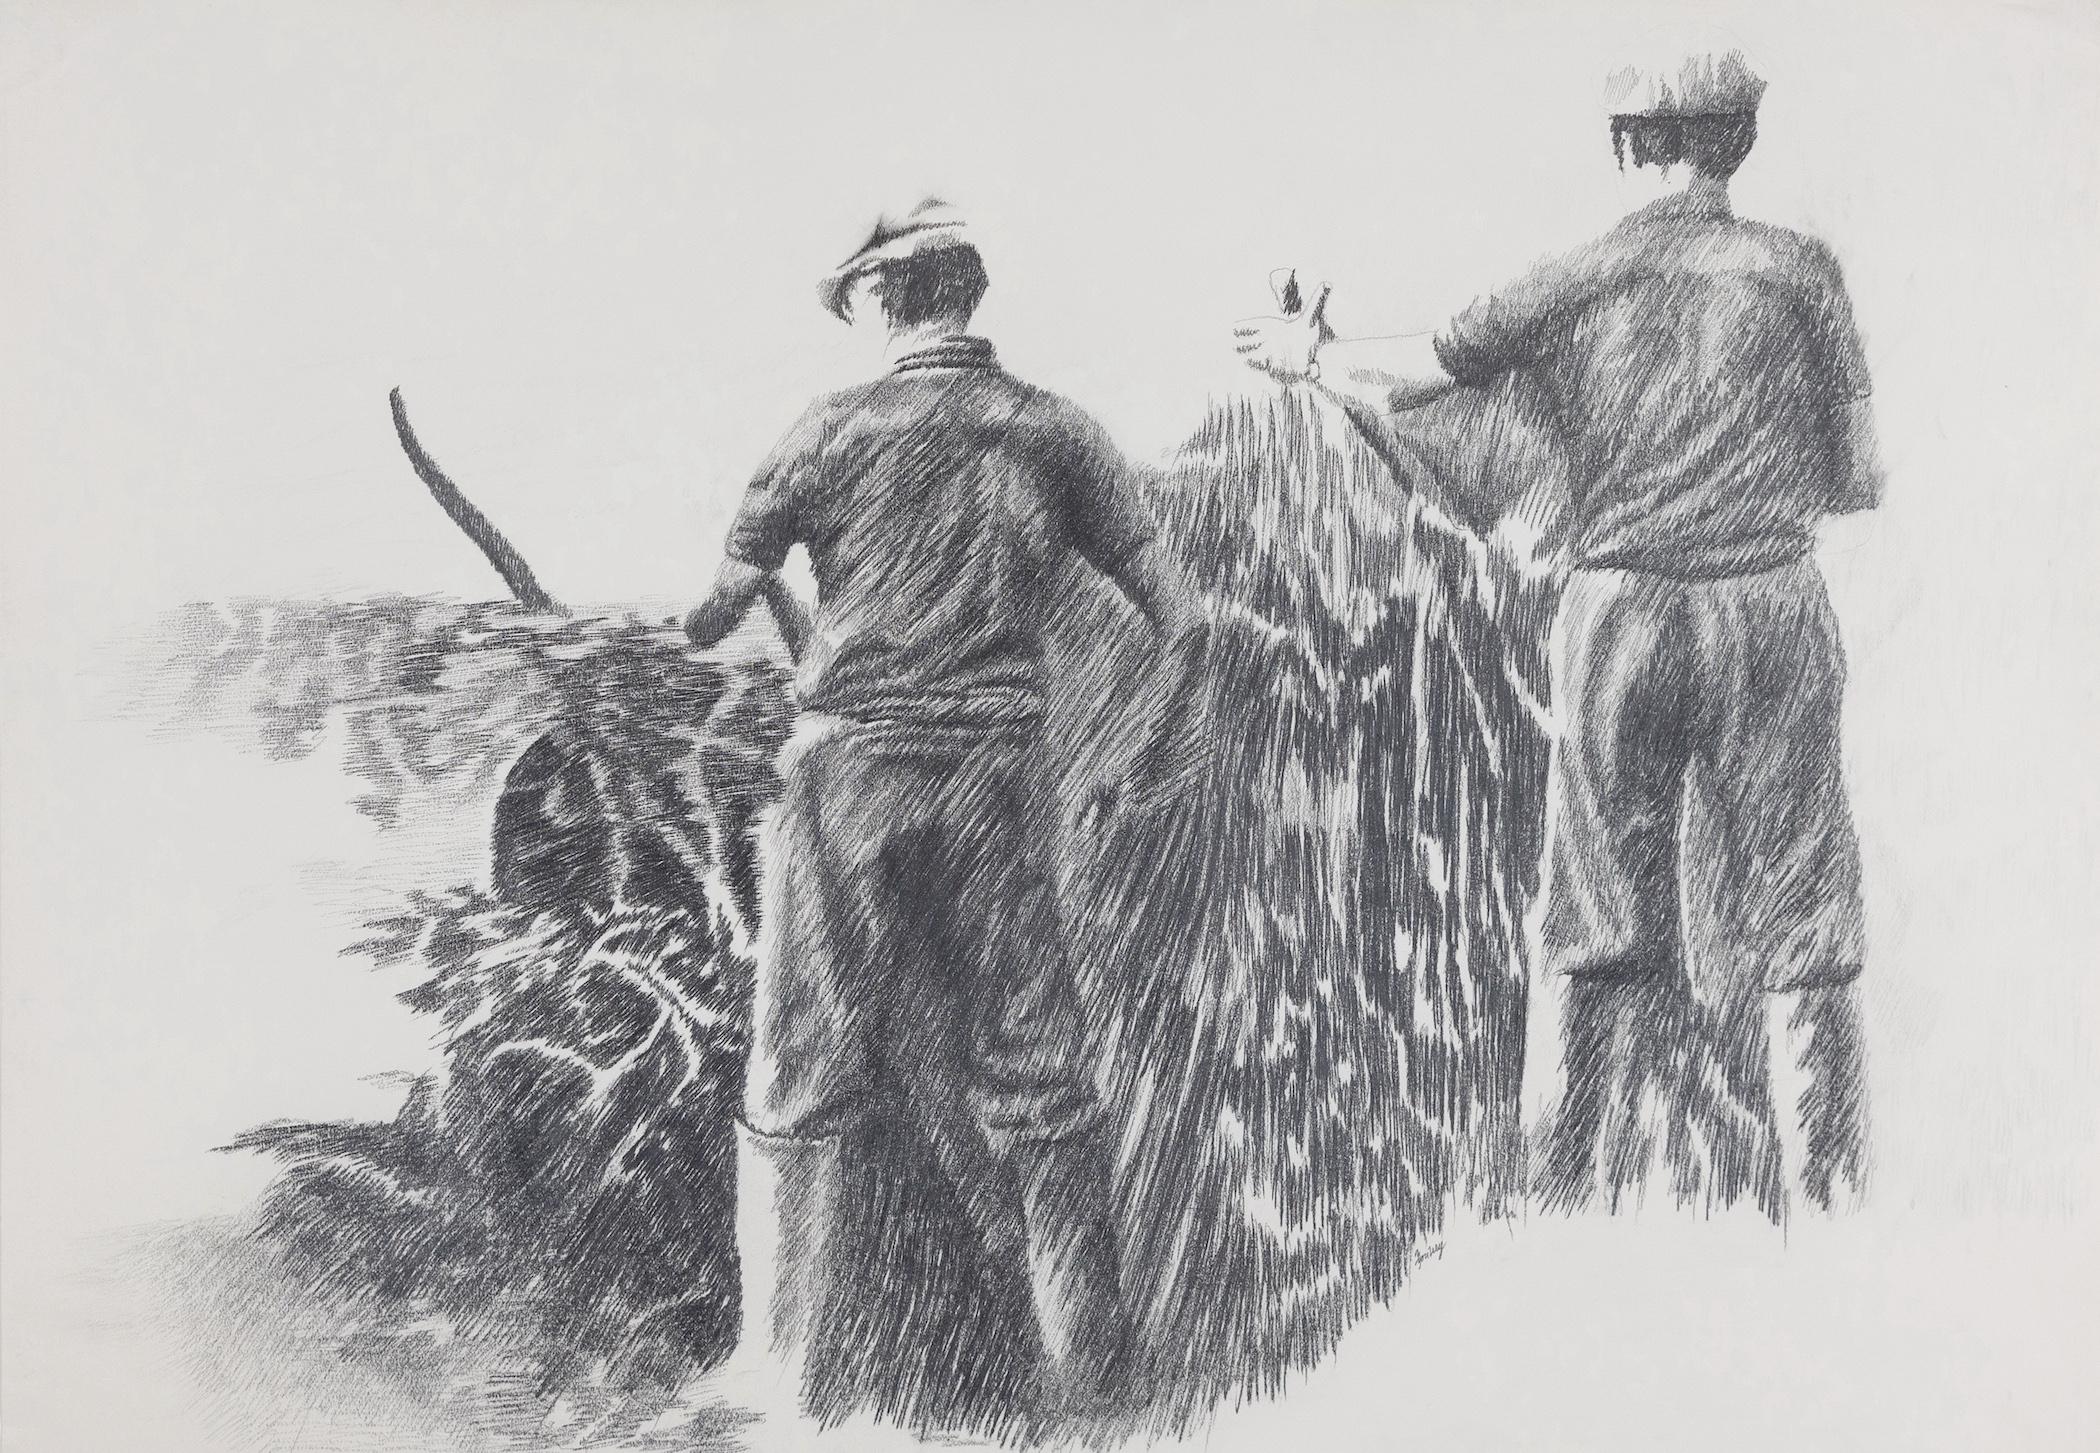 Farmhands by Yvon Pissarro (b. 1937)
Pencil on paper
75 x 108 cm (29 ¹/₂ x 42 ¹/₂ inches)
Signed lower right, Yvon Vey

Provenance: Studio of the Artist, Montpellier

Artist biography:
The son of Paulémile and grandson of Camille Pissarro, Yvon